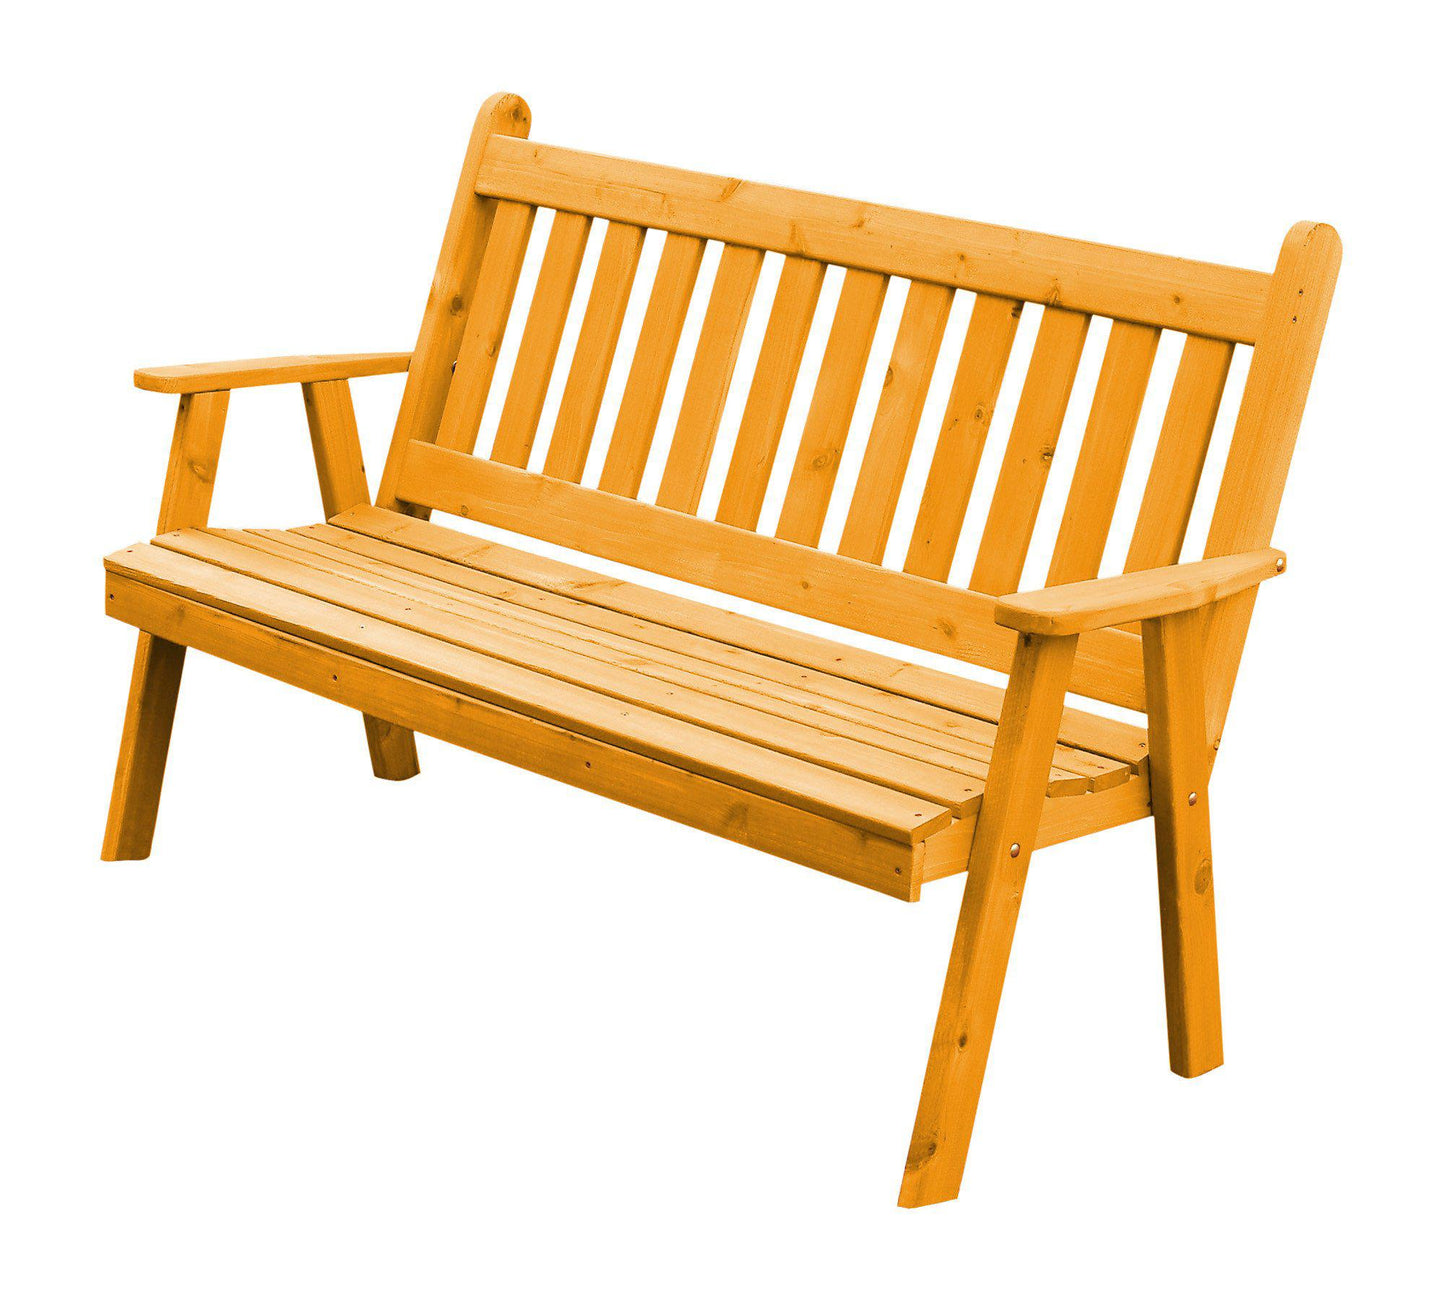 A&L Furniture Co. Western Red Cedar 5' Traditional English Garden Bench - LEAD TIME TO SHIP 4 WEEKS OR LESS